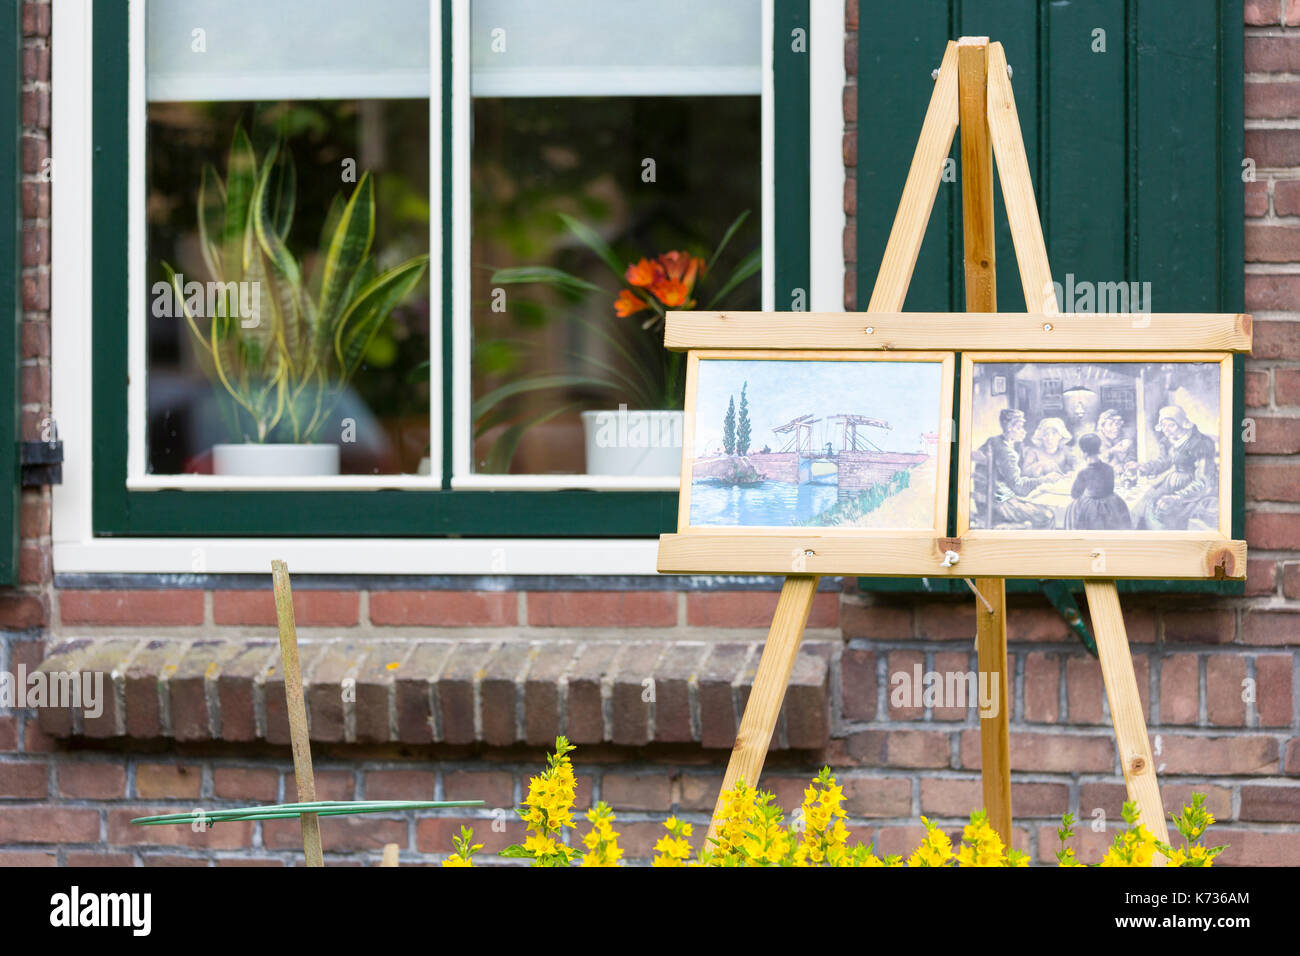 Residents display Vincent Van Gogh posters at home by Kroller Muller museum, during traditional festival, Otterlo, Netherlands Stock Photo